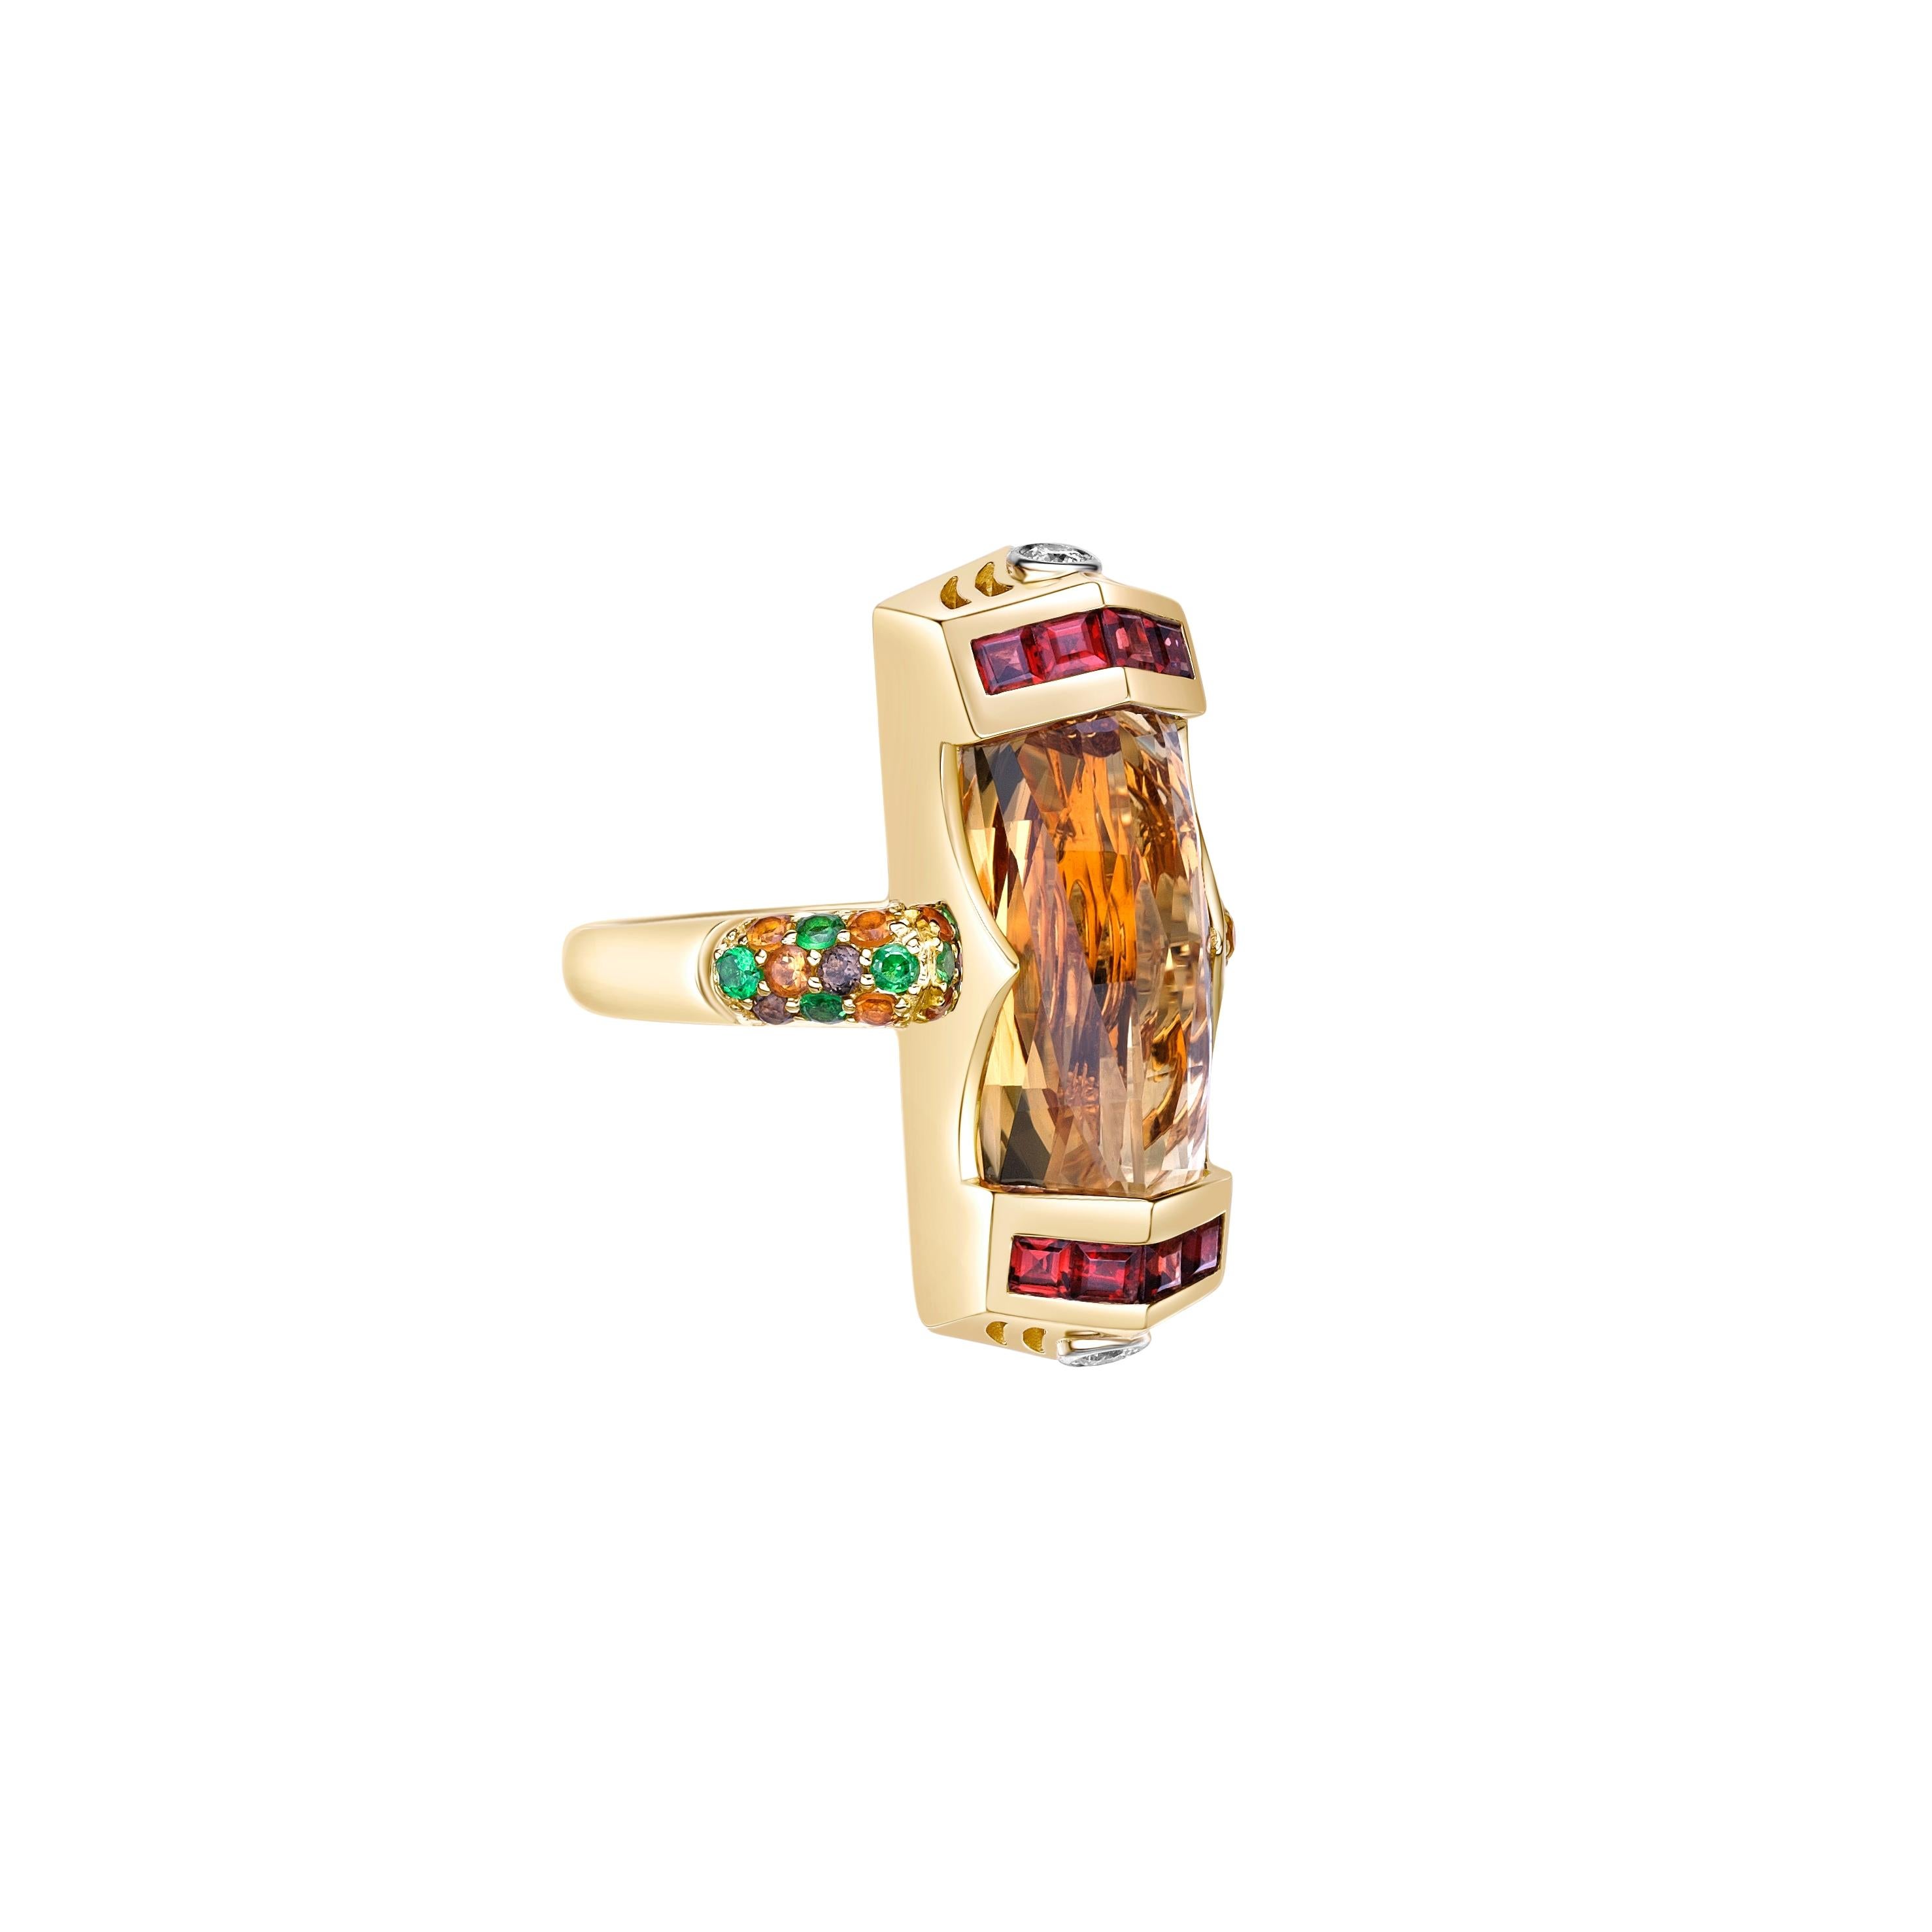 Sunita Nahata has presented cocktail rings to her line. Wearing these rings is meant for special occasions. For ladies who love quality, the cocktail ring line featuring precious stones like Garnet, London blue topaz, Honey quartz and Amethyst is